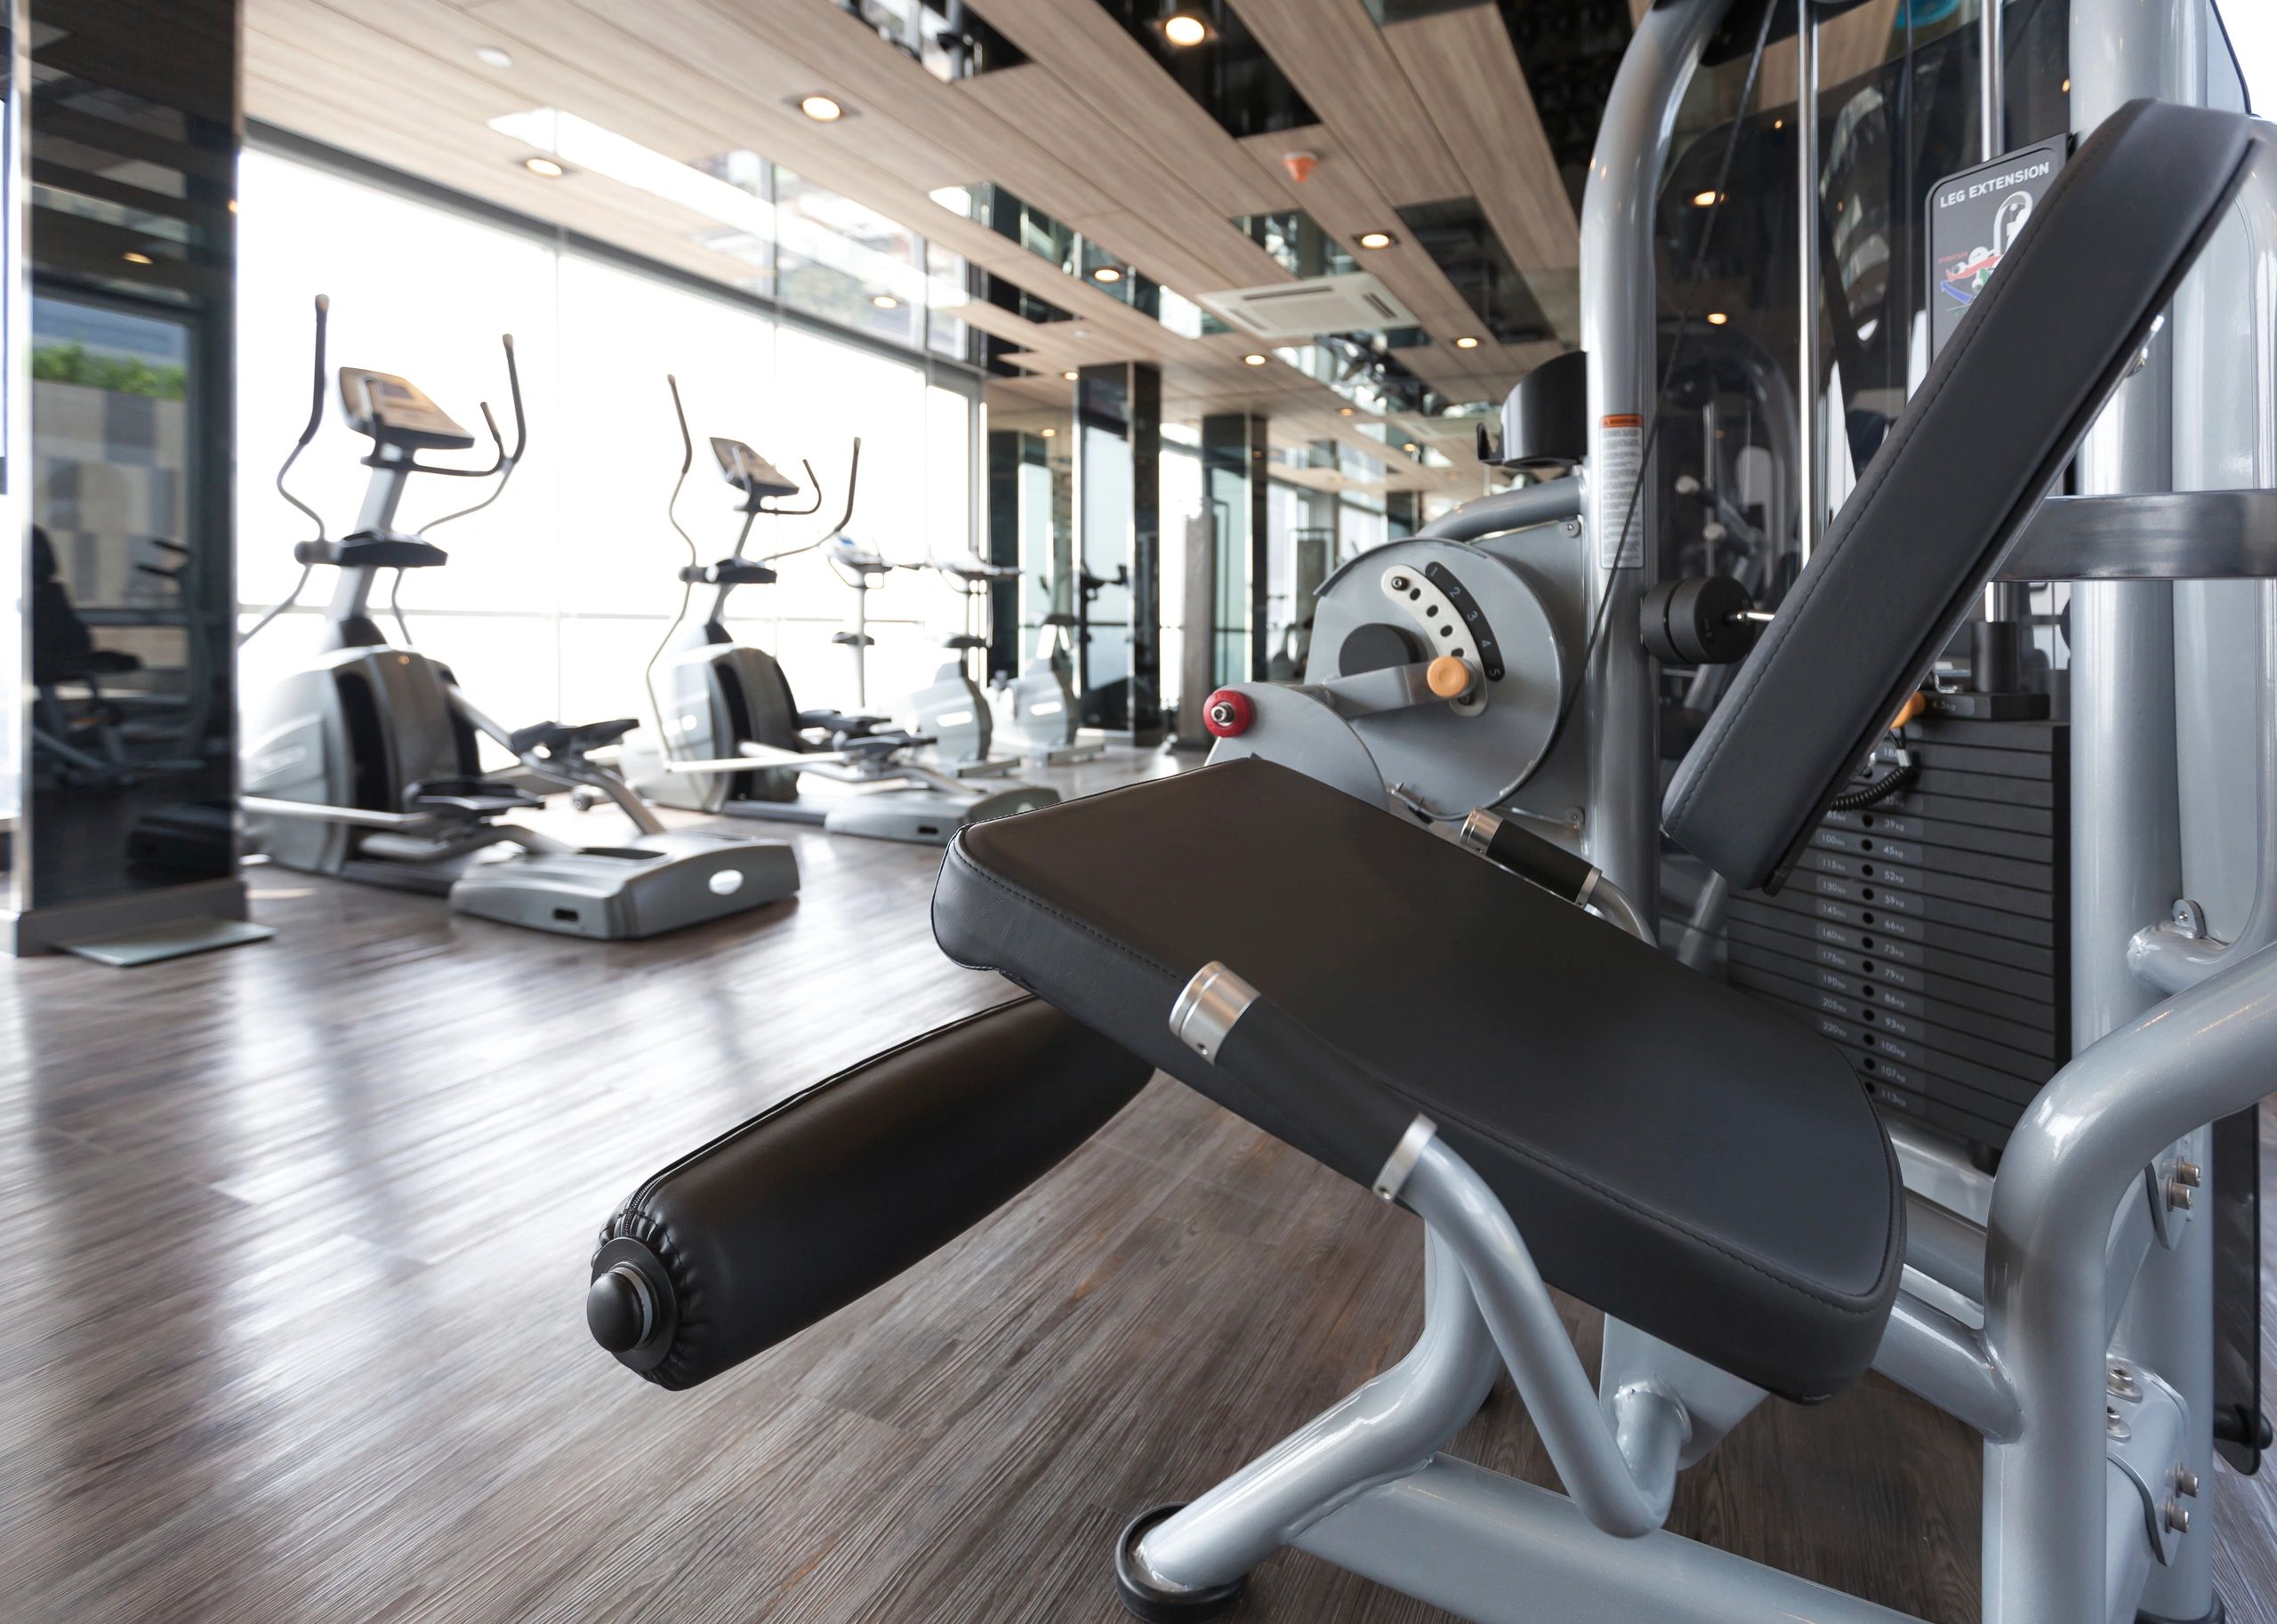 20 Minute Gym equipment hire wollongong for Today